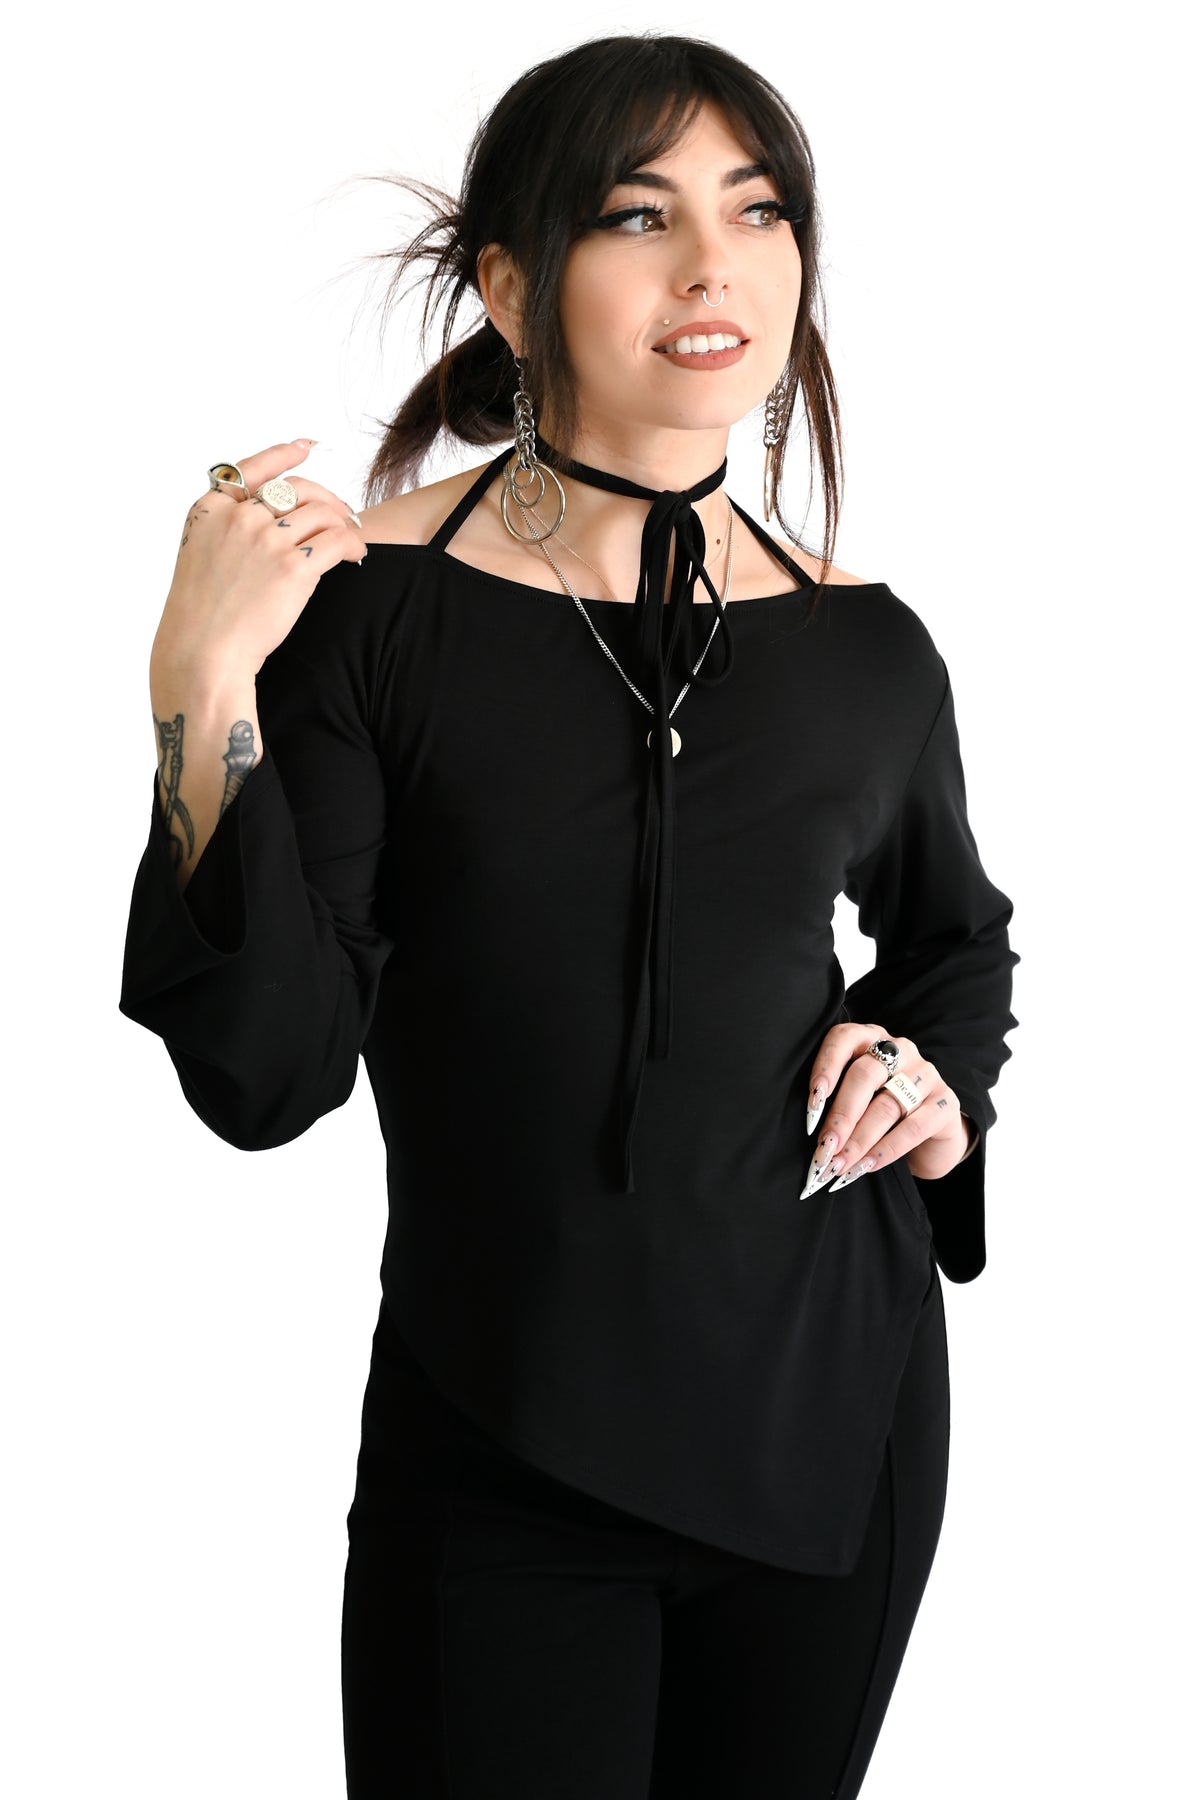 black asymmetrical top with adjustable tie neckline and long sleeves